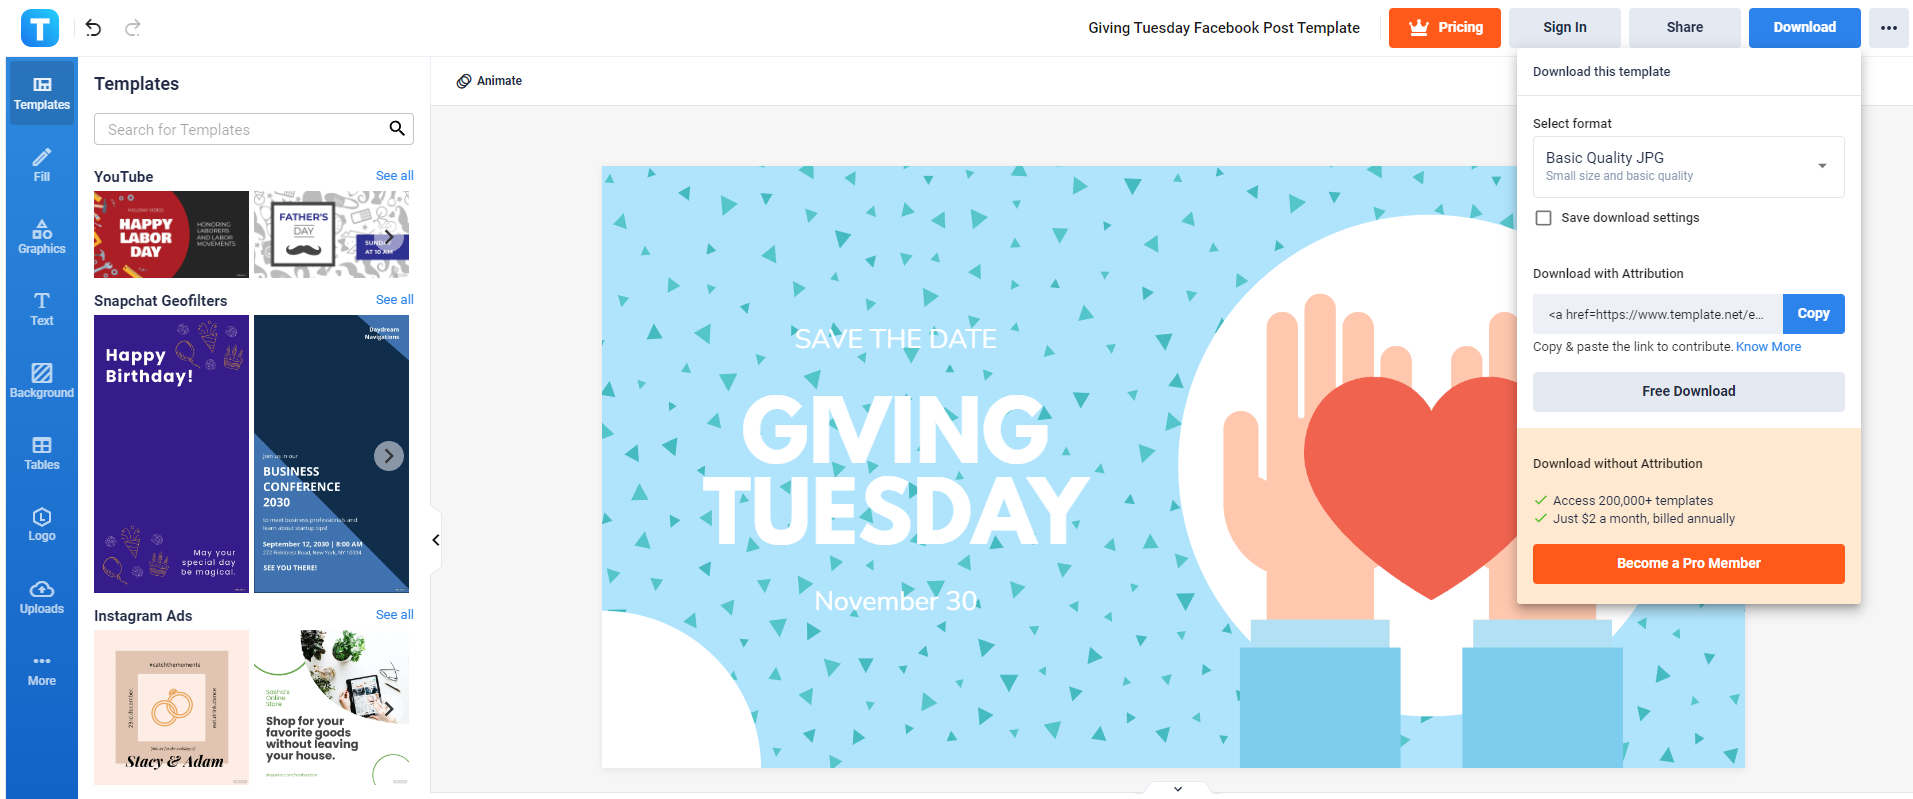 giving tuesday facebook post template